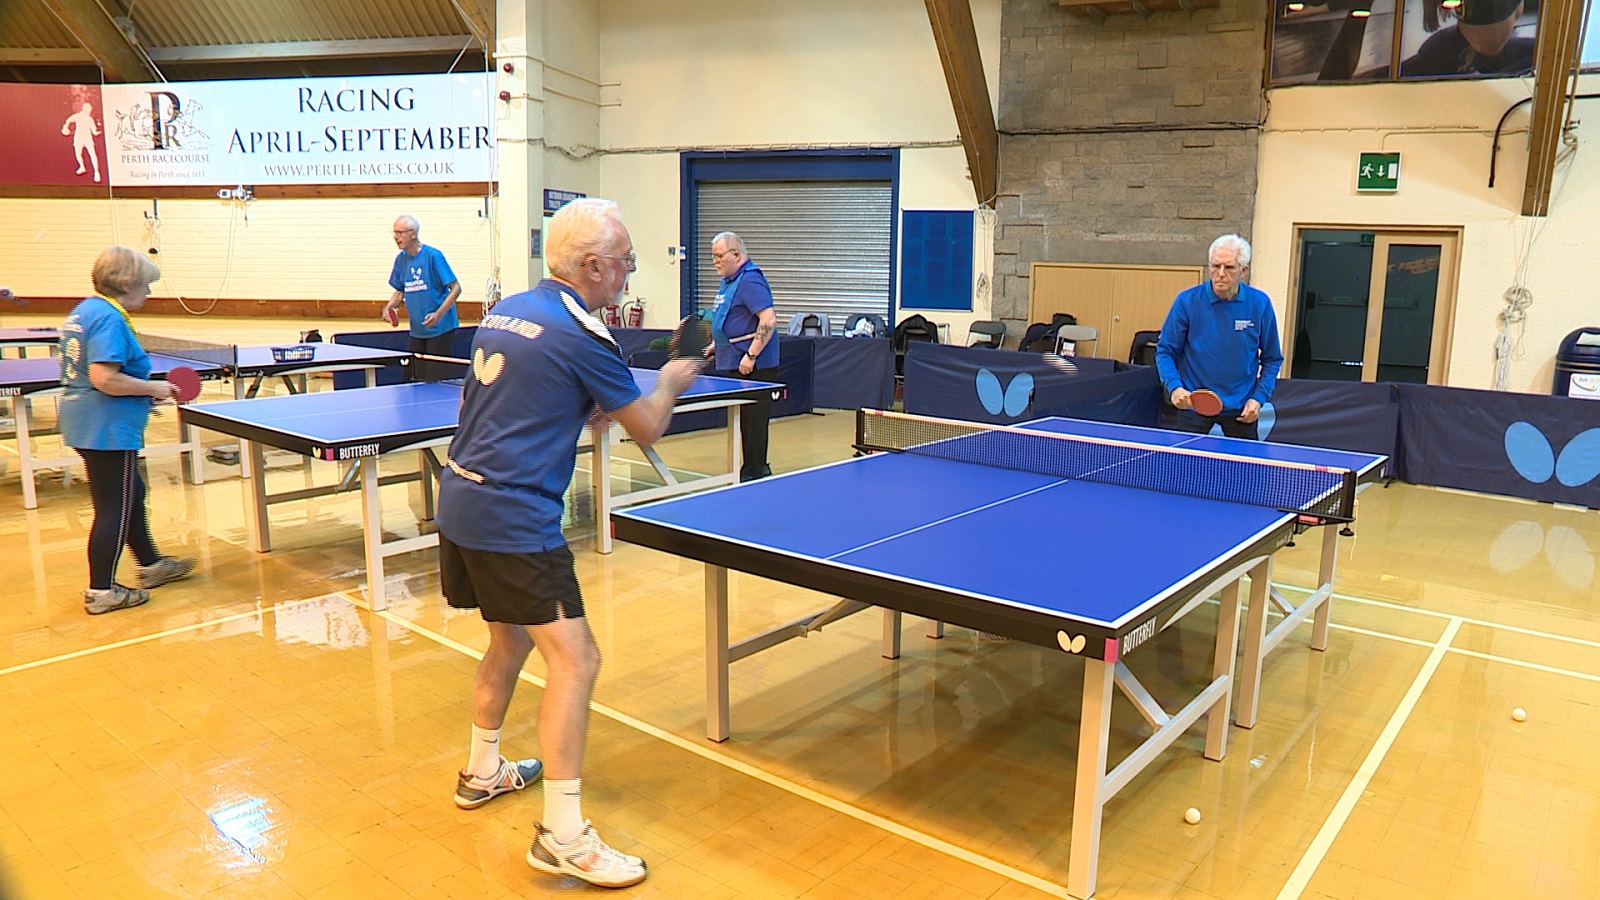 Ping Pong Parkinson's in Perth has been running for a few months